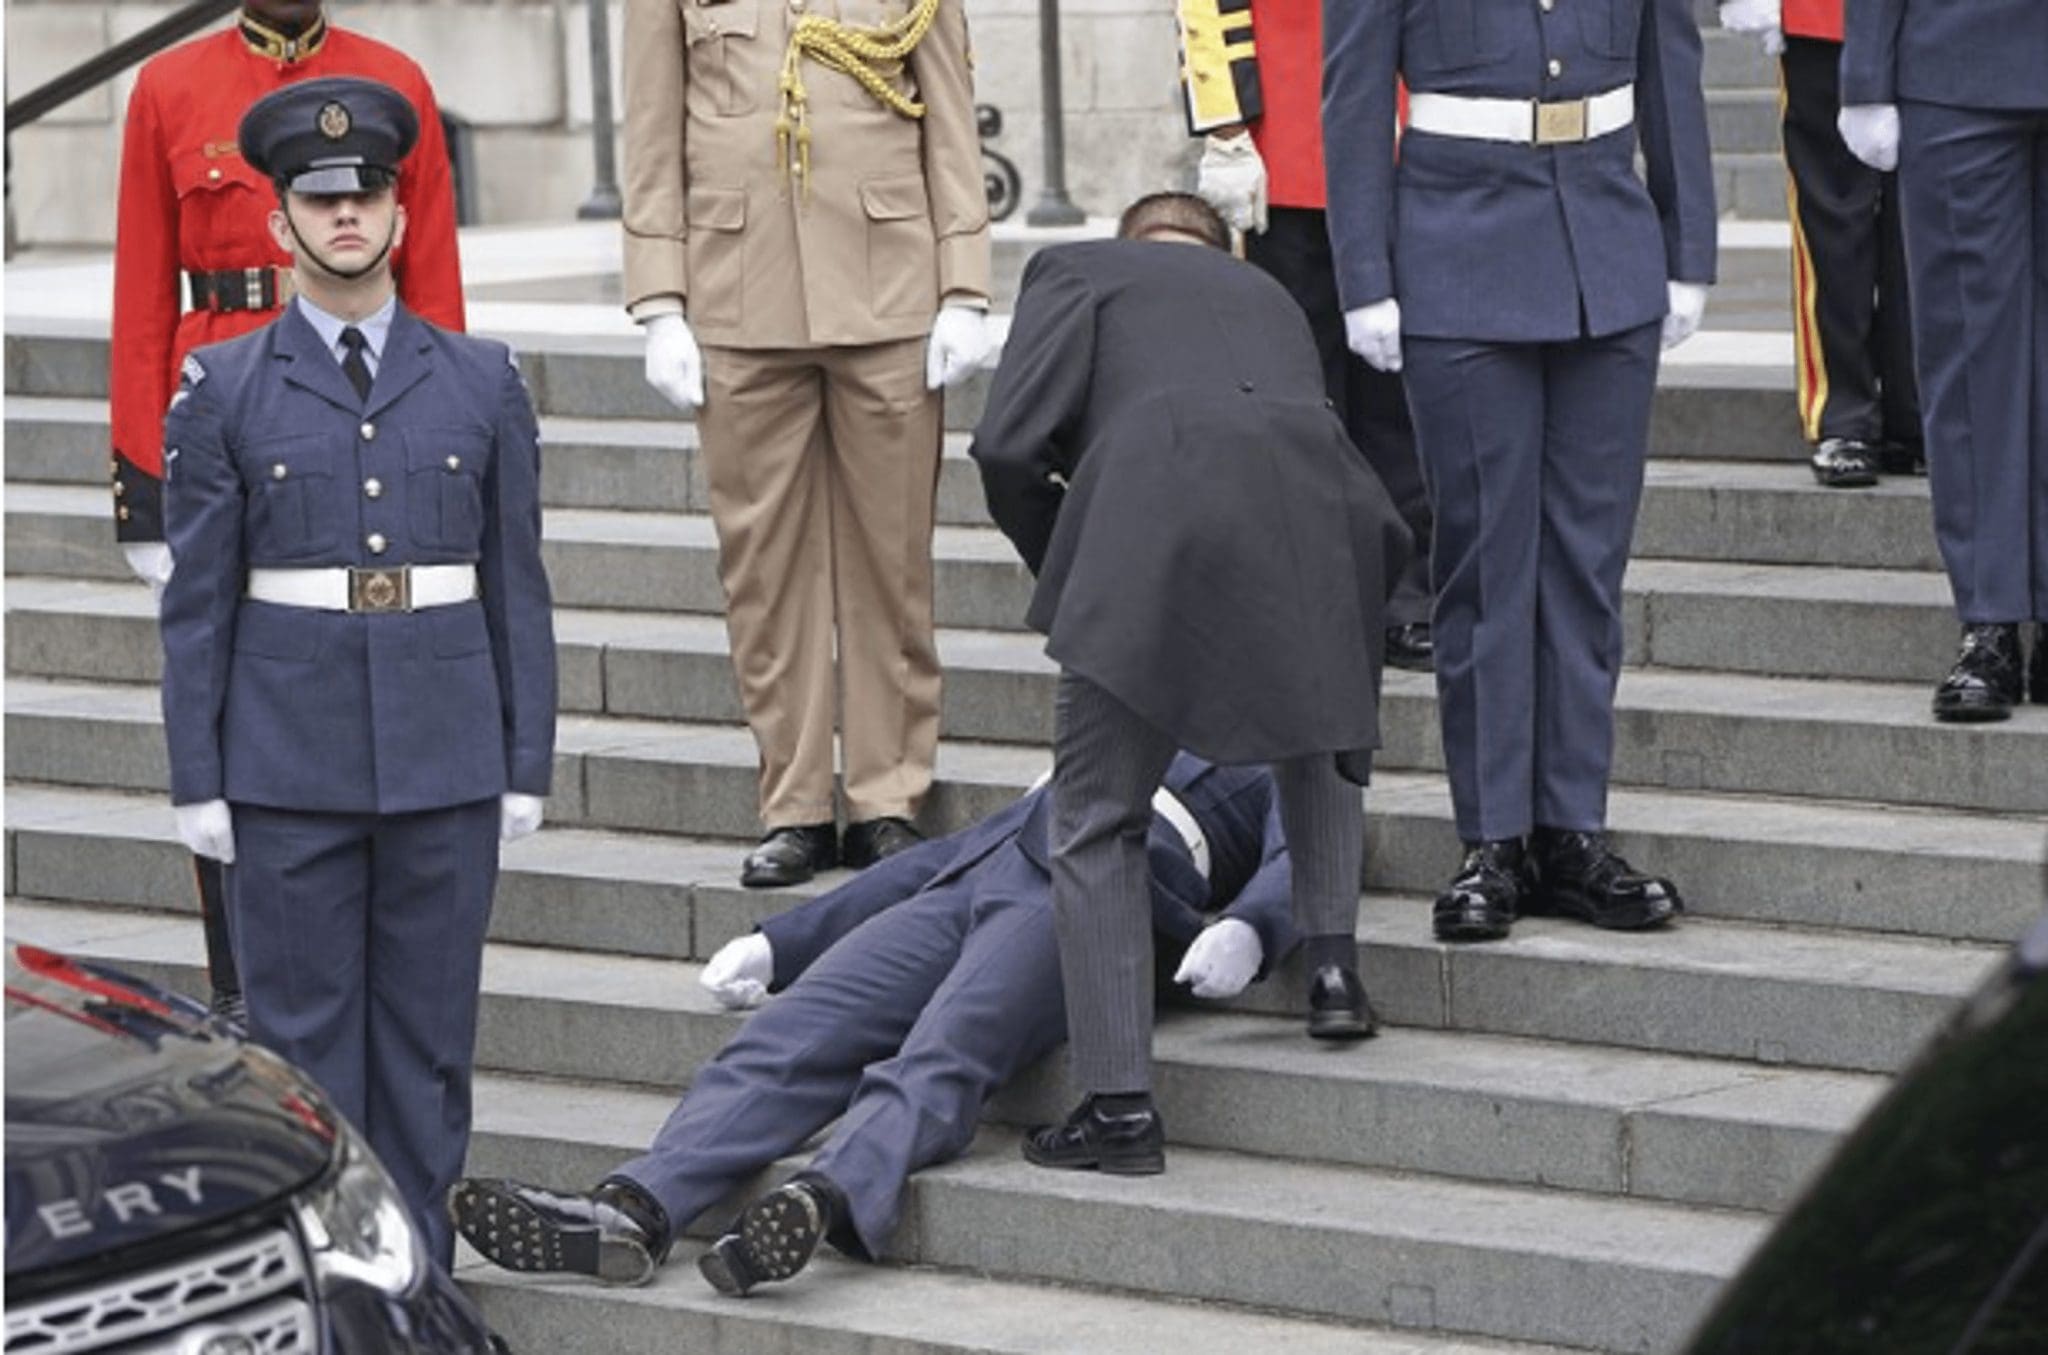 Several soldiers fainted during a service in honor of the anniversary of the reign of Elizabeth II